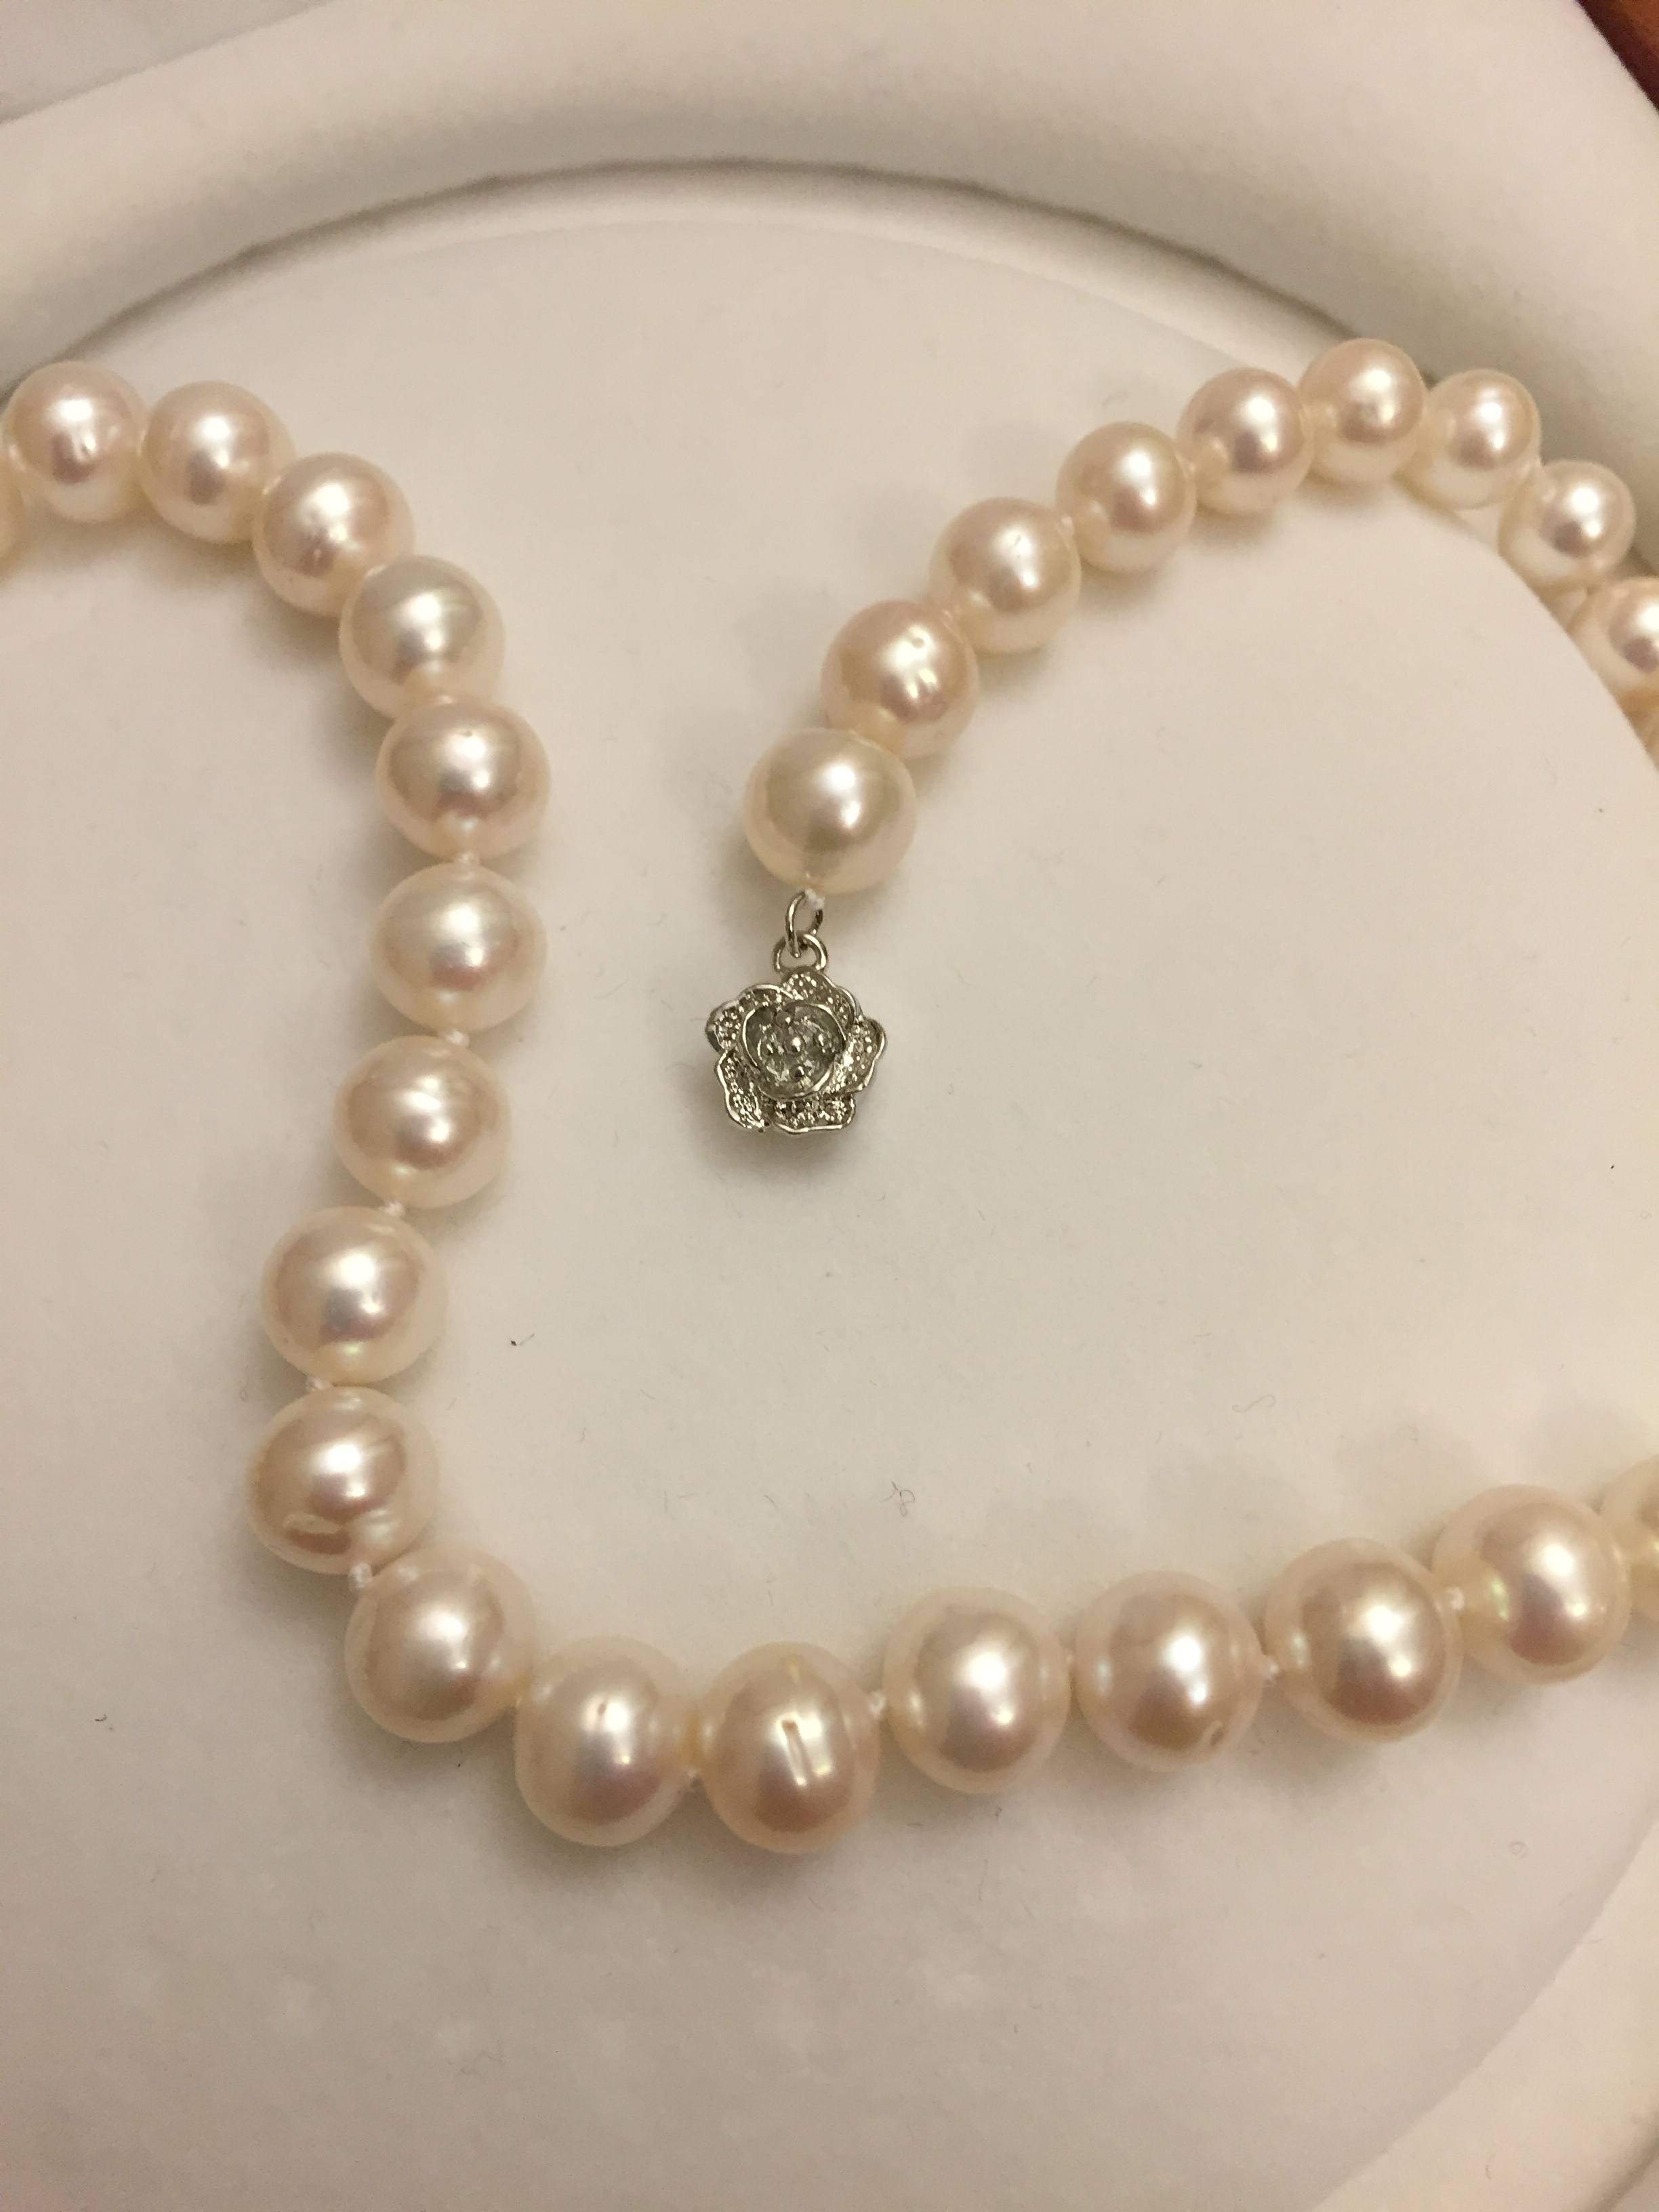 9mm white freshwater pearl necklace